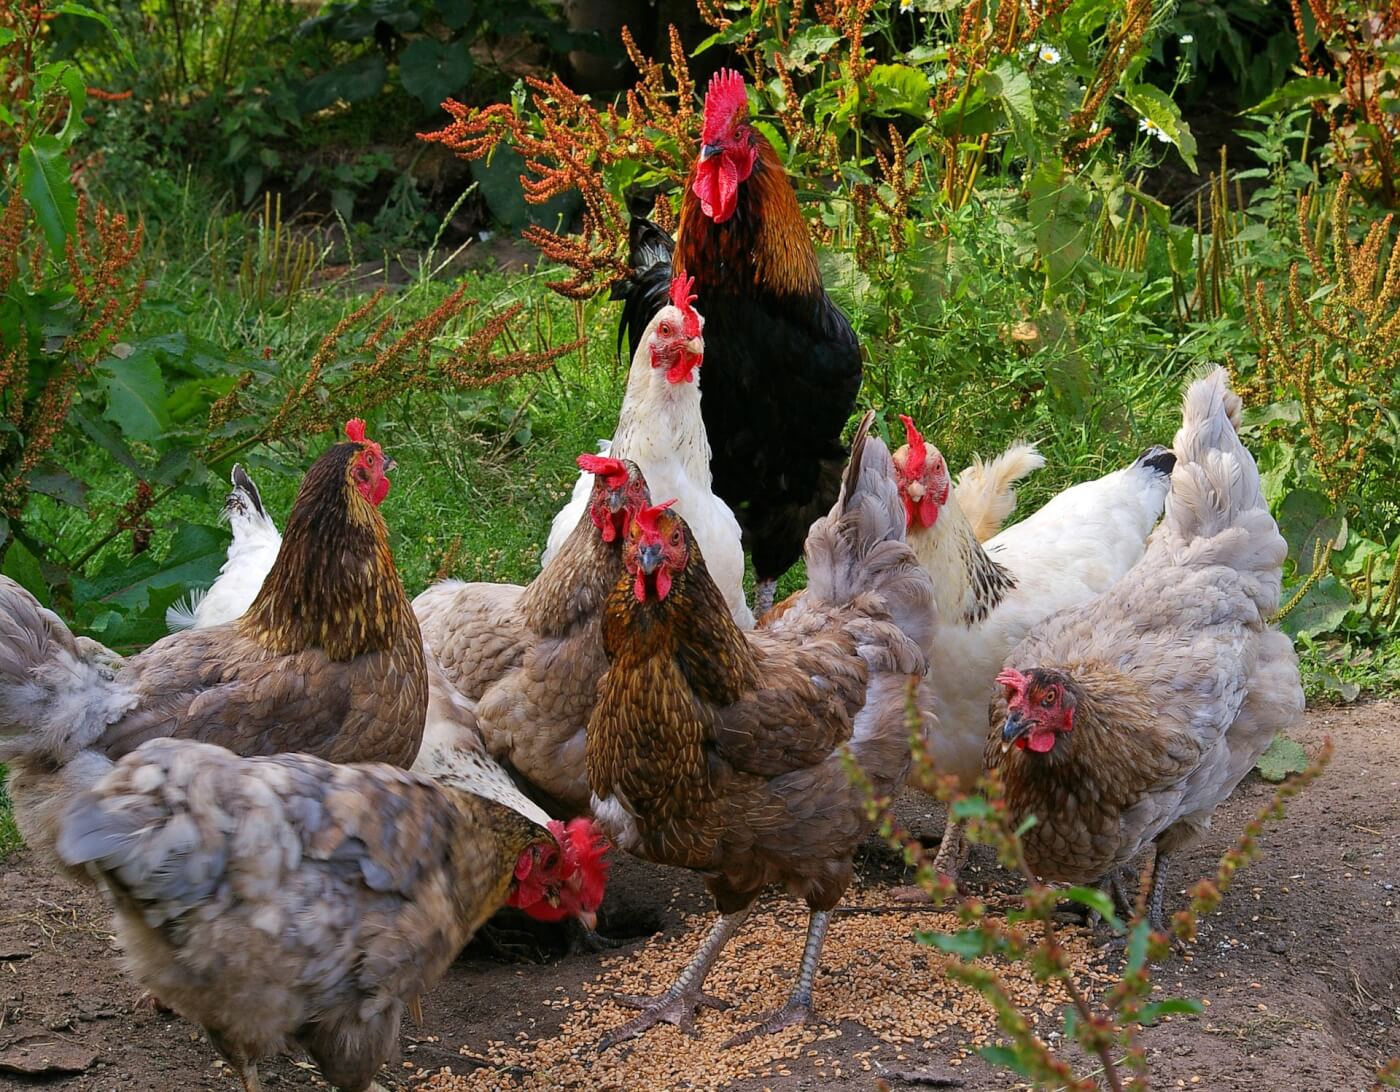 10 Surprising Facts About Chickens